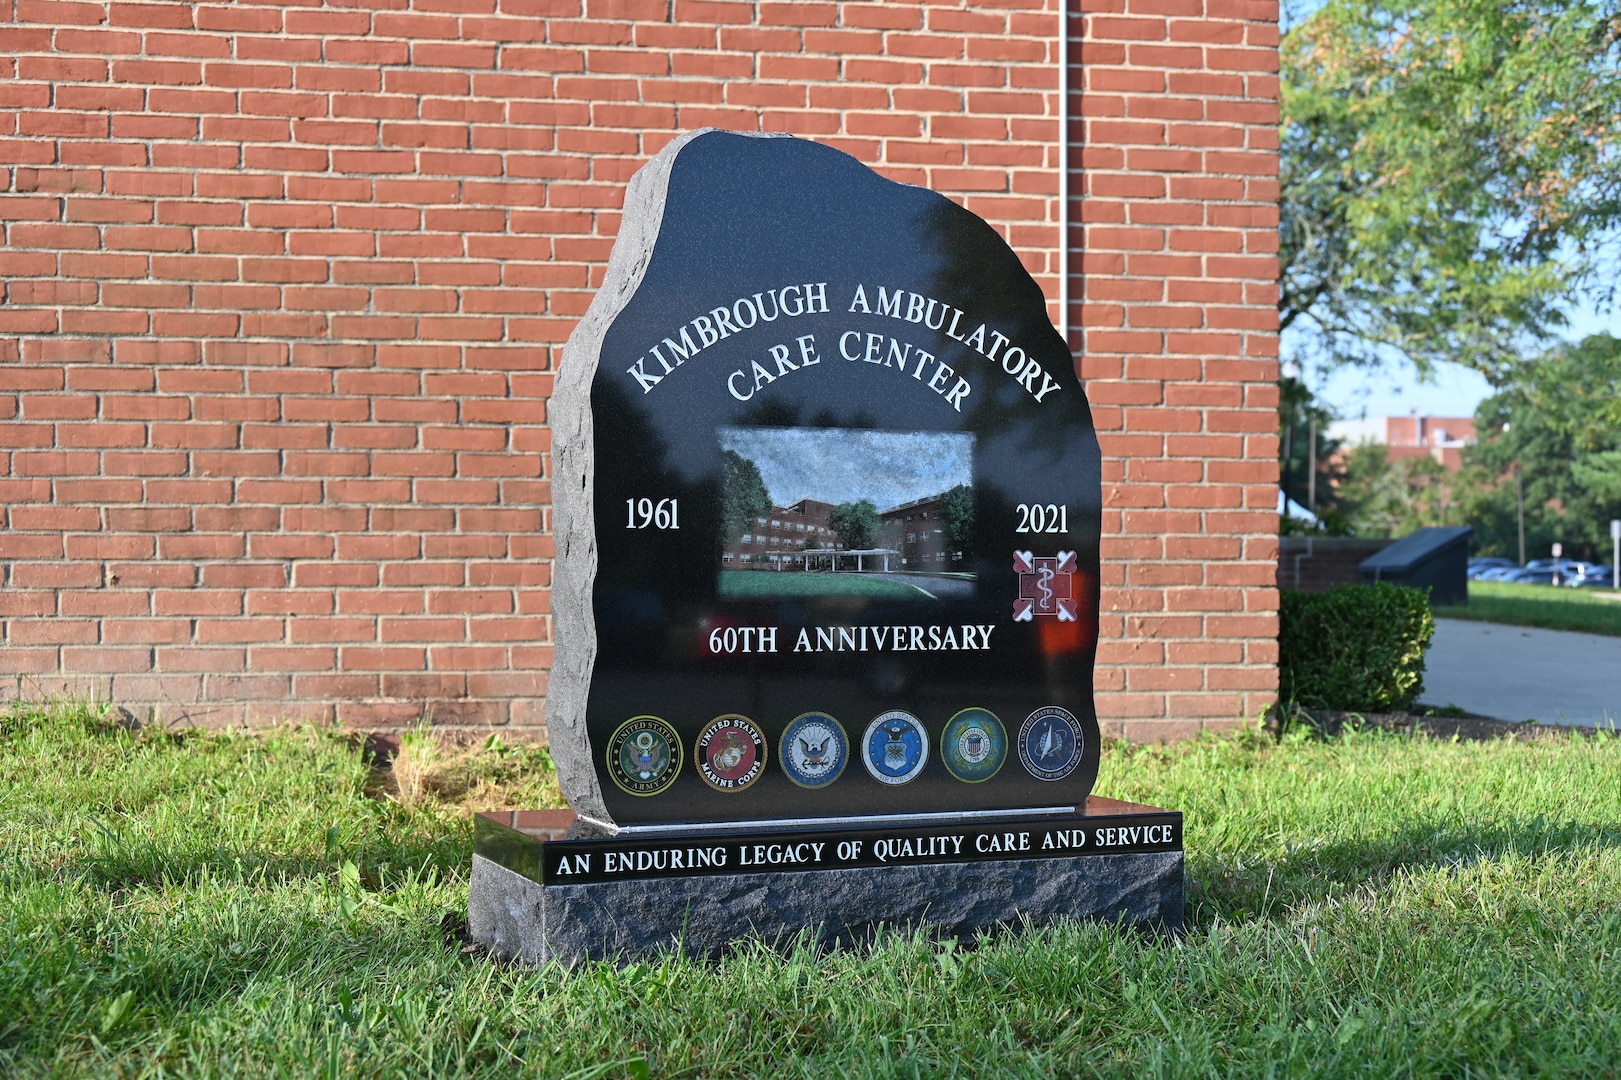 A commemorative stone sits near the Pharmacy entrance to Kimbrough Ambulatory Care Center after it was unveiled at the 60th anniversary ceremony held at the facility’s main entrance, Sept. 14, 2021.